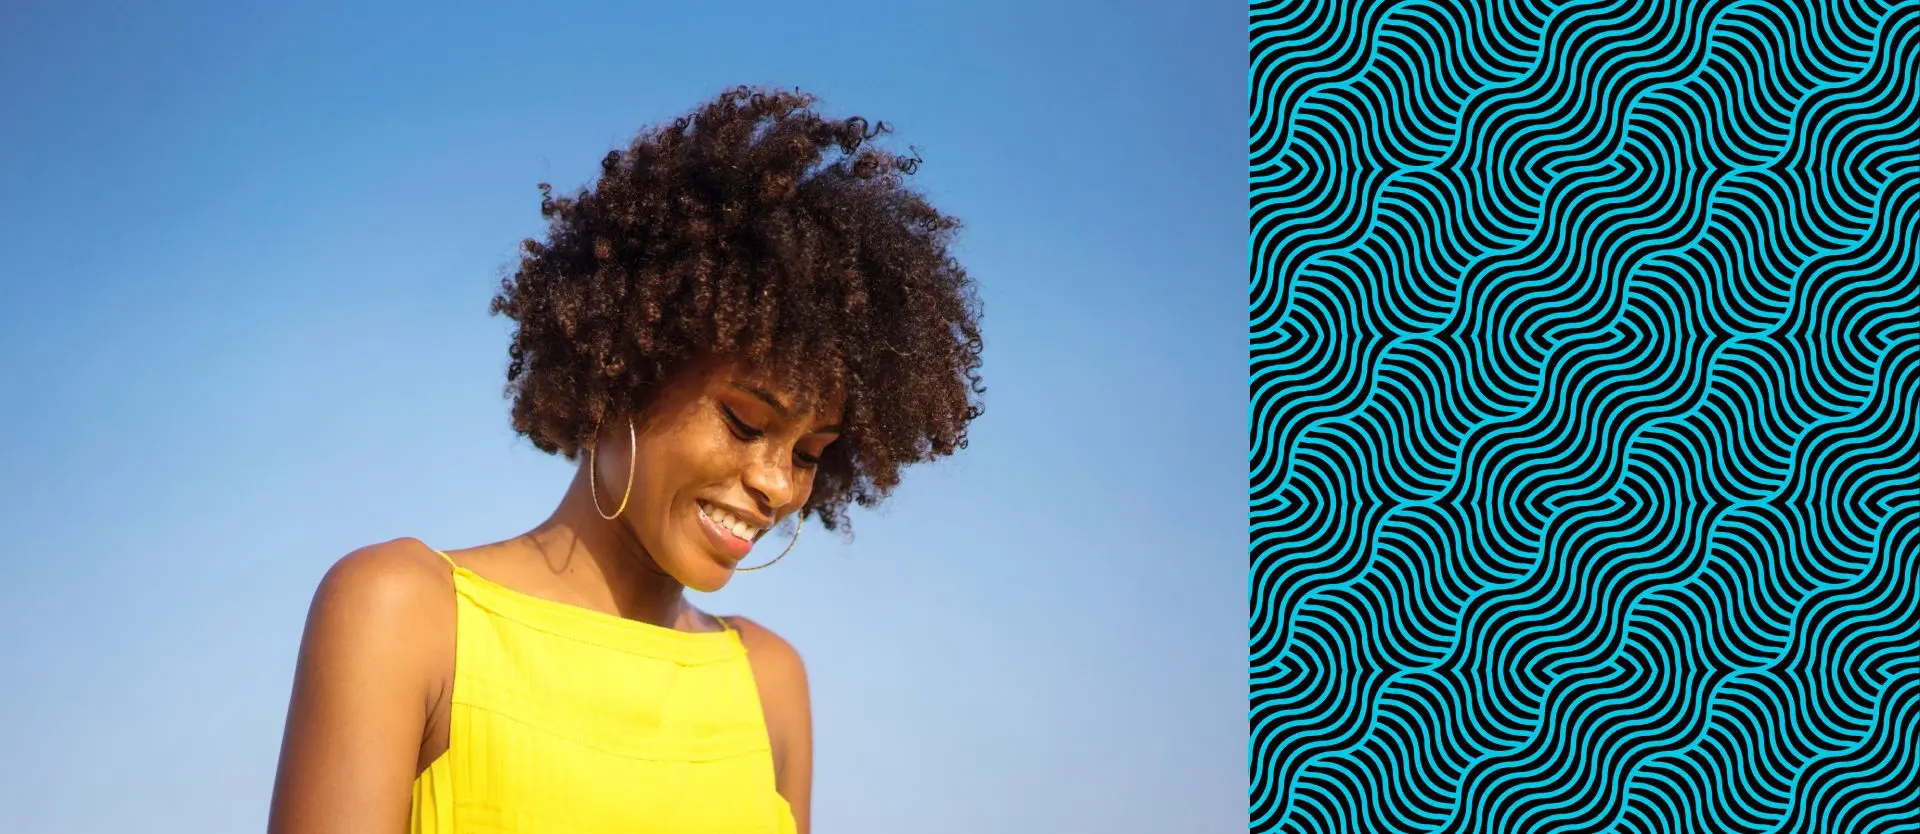 Woman smiling with curly hair style